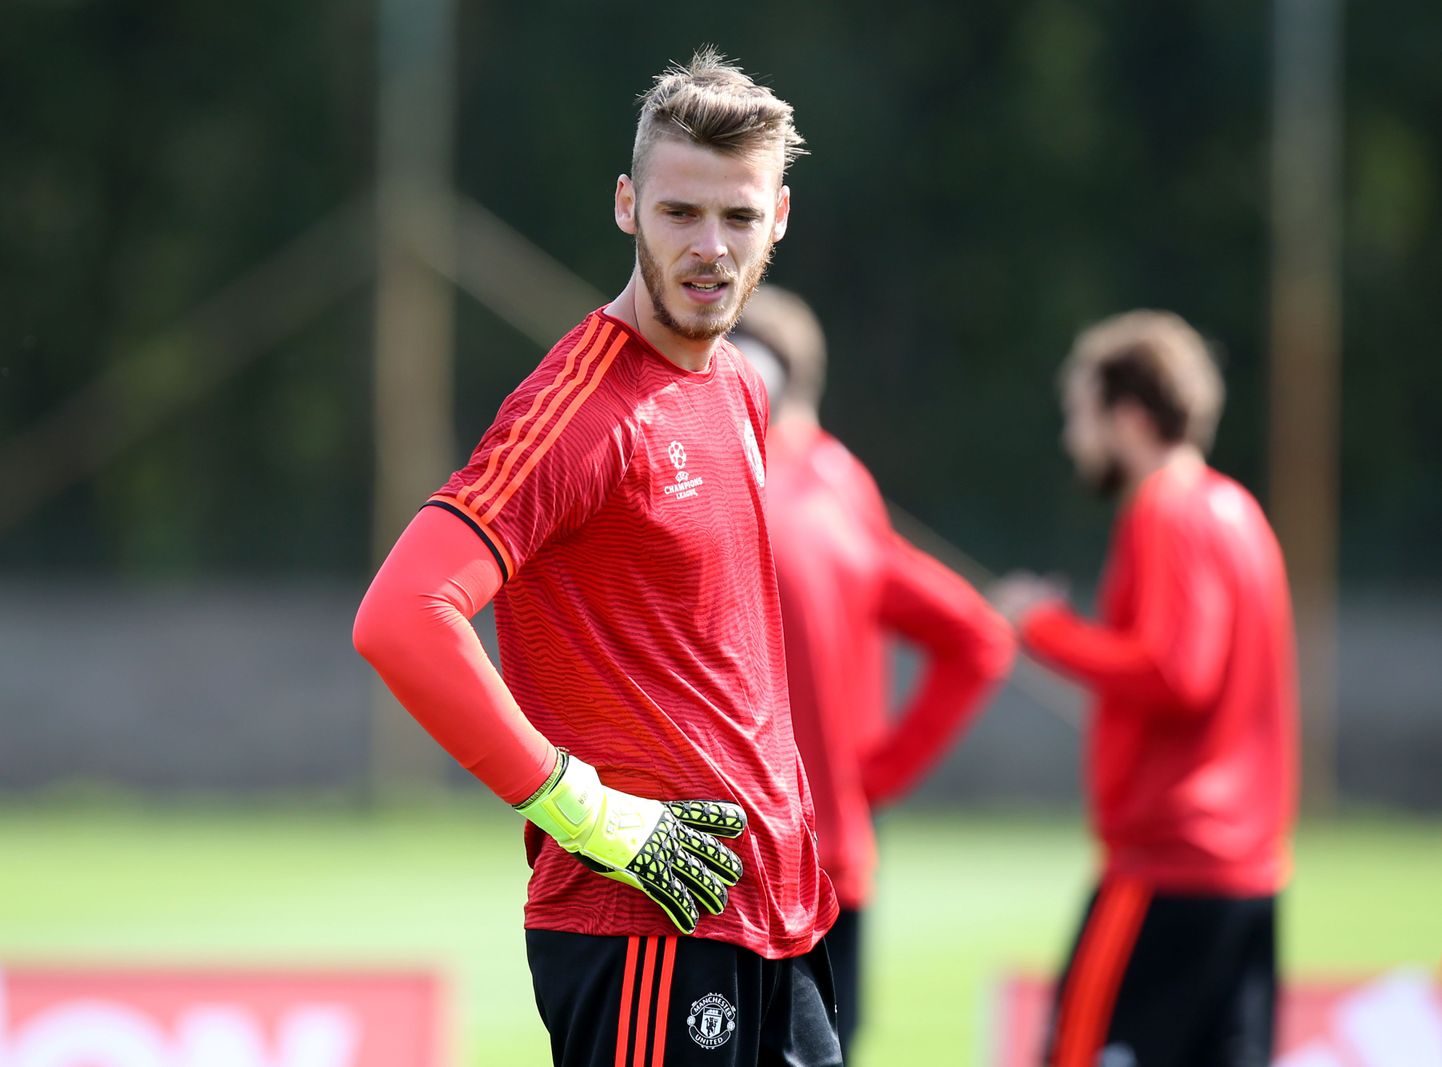 Manchester United's David De Gea during a training session at the Aon Training Complex, Manchester.